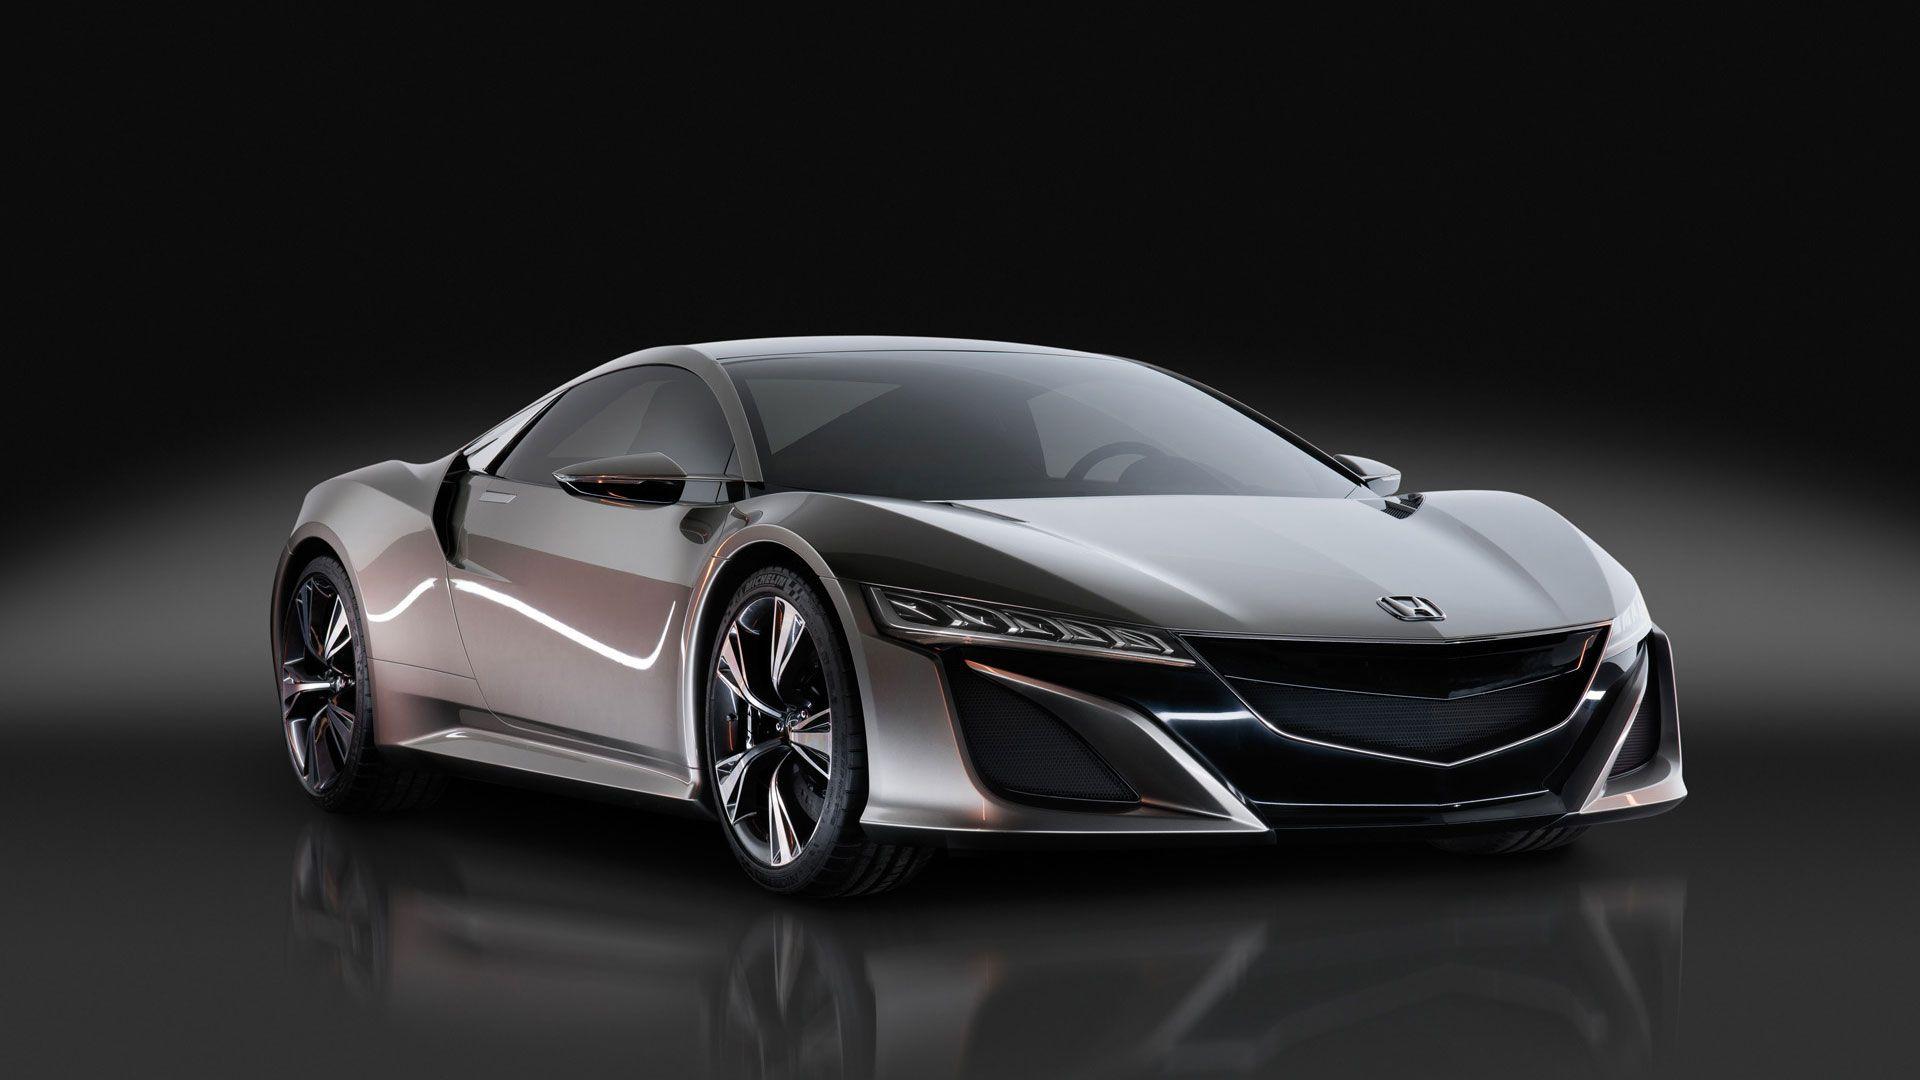 Acura Nsx Wallpapers Wallpaper Cave